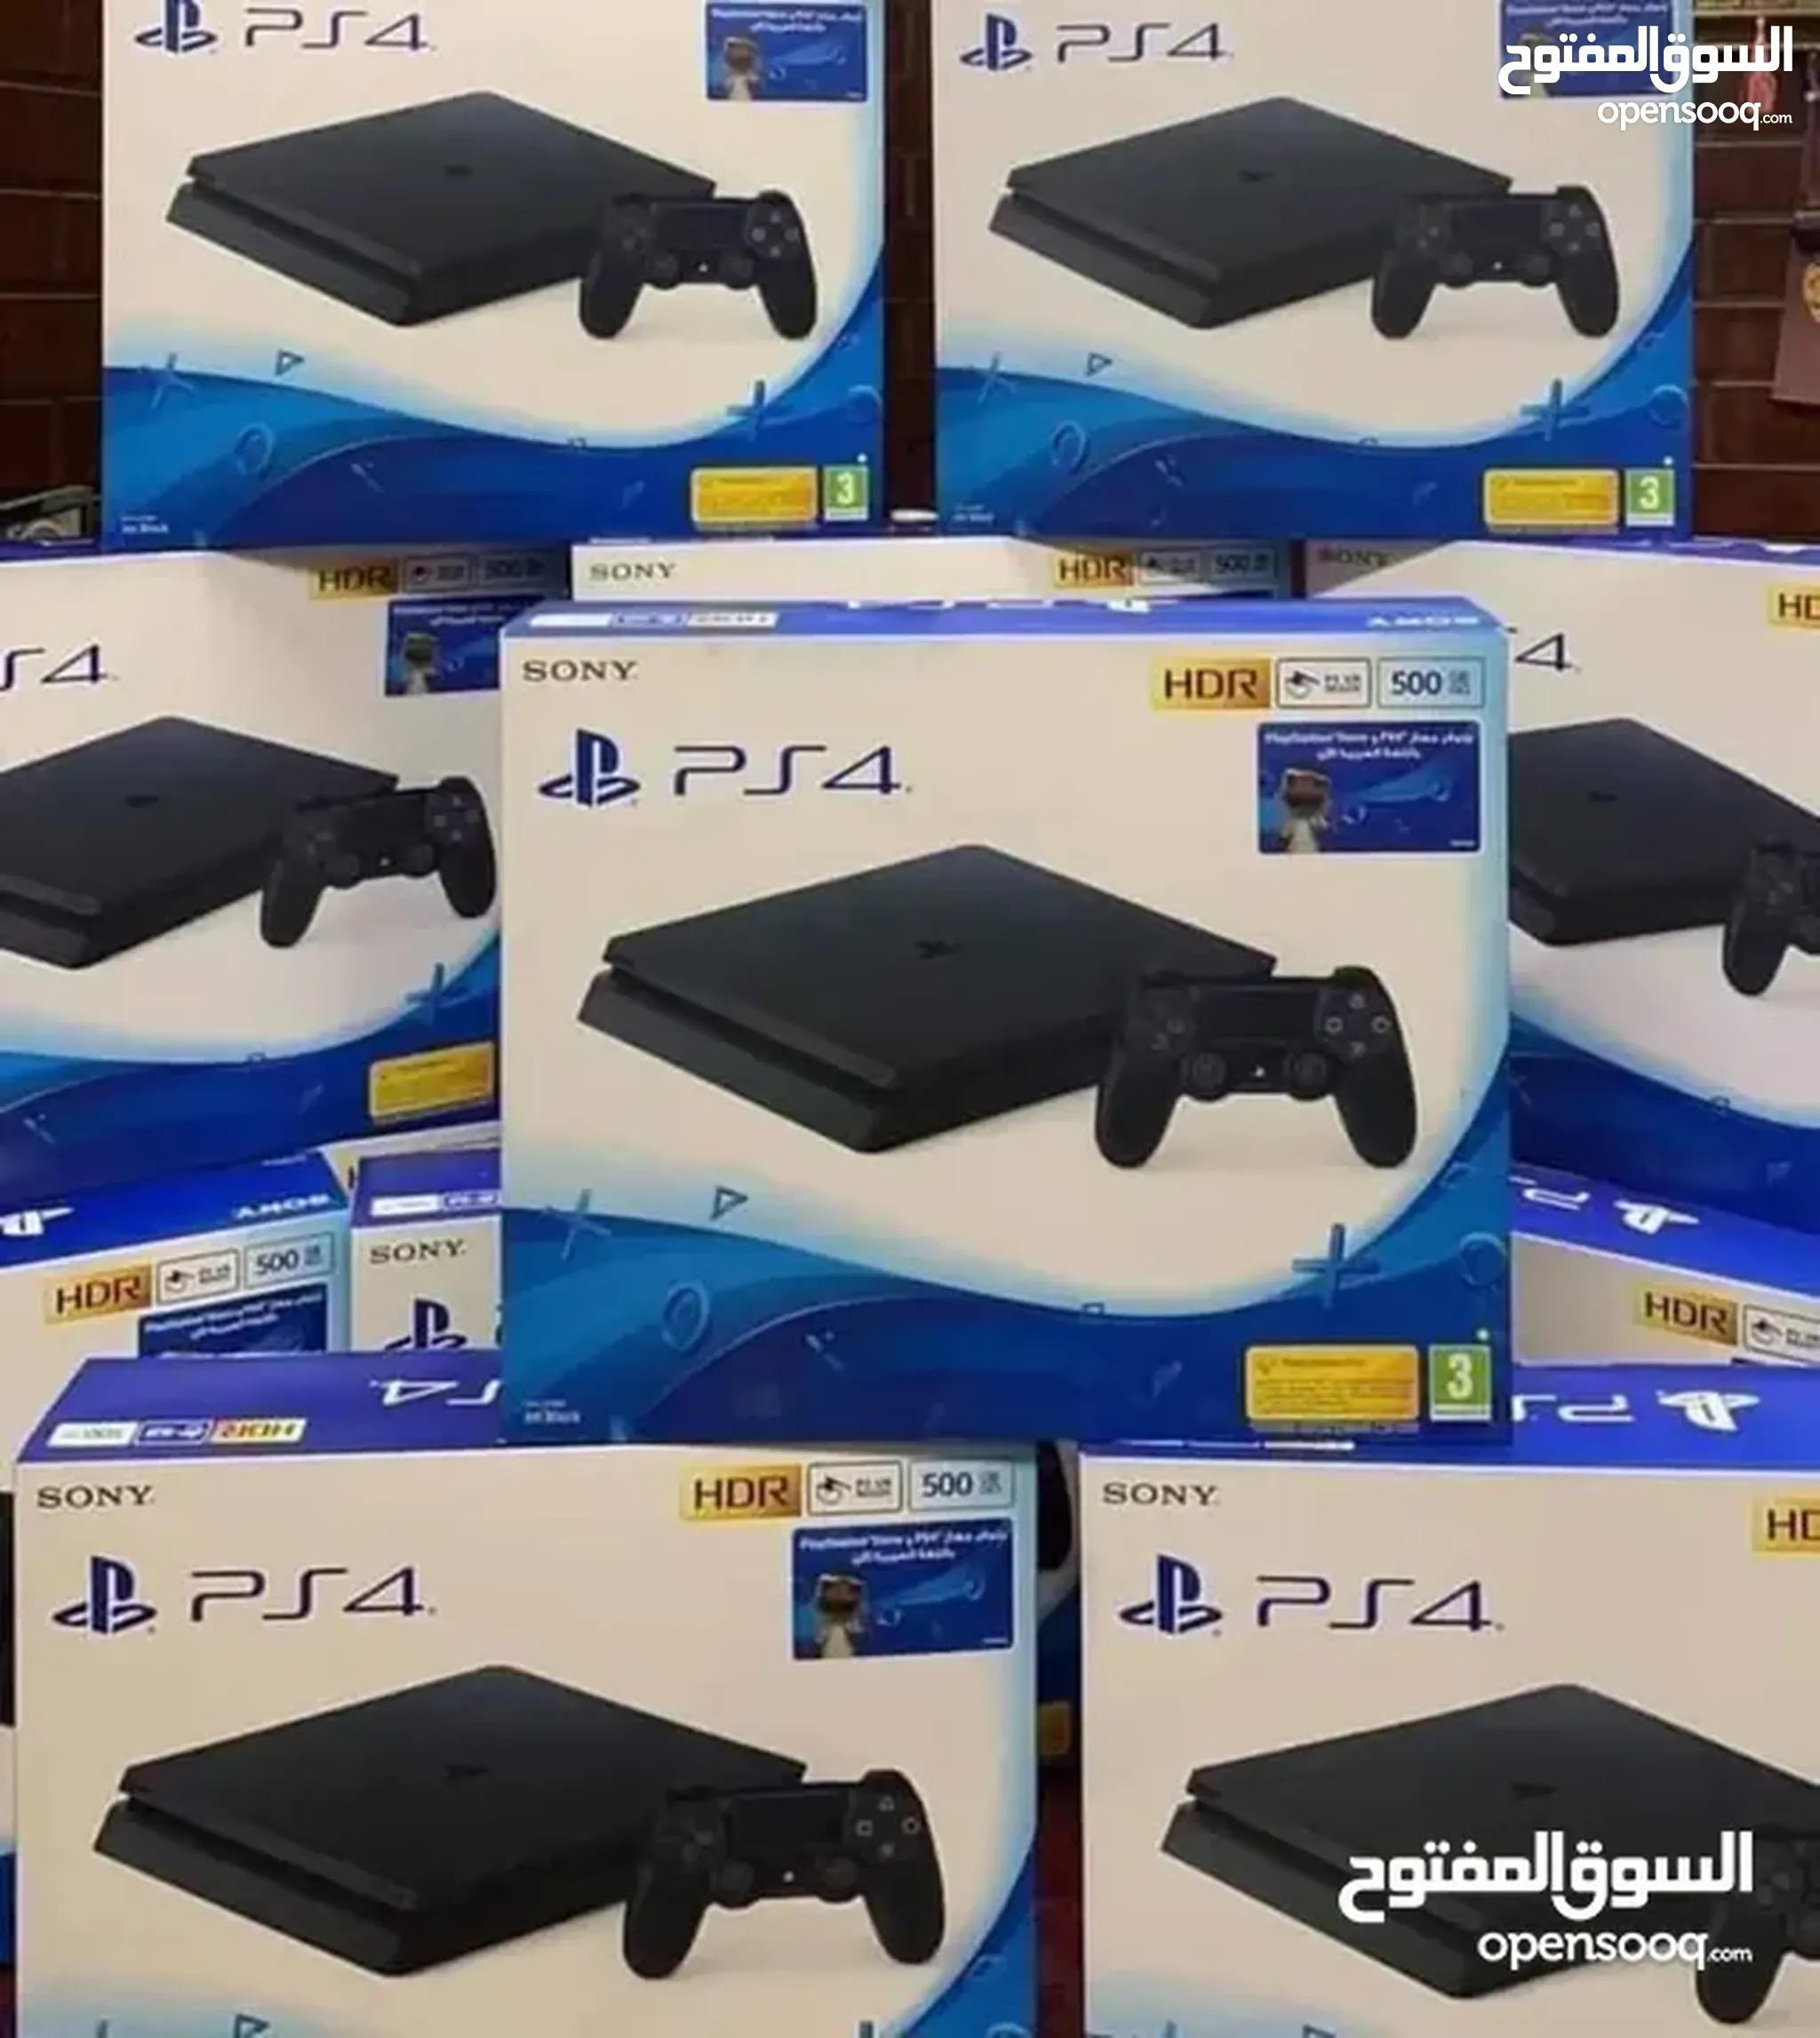 Playstation 4 For Sale in Jordan : Used : Best Prices | OpenSooq